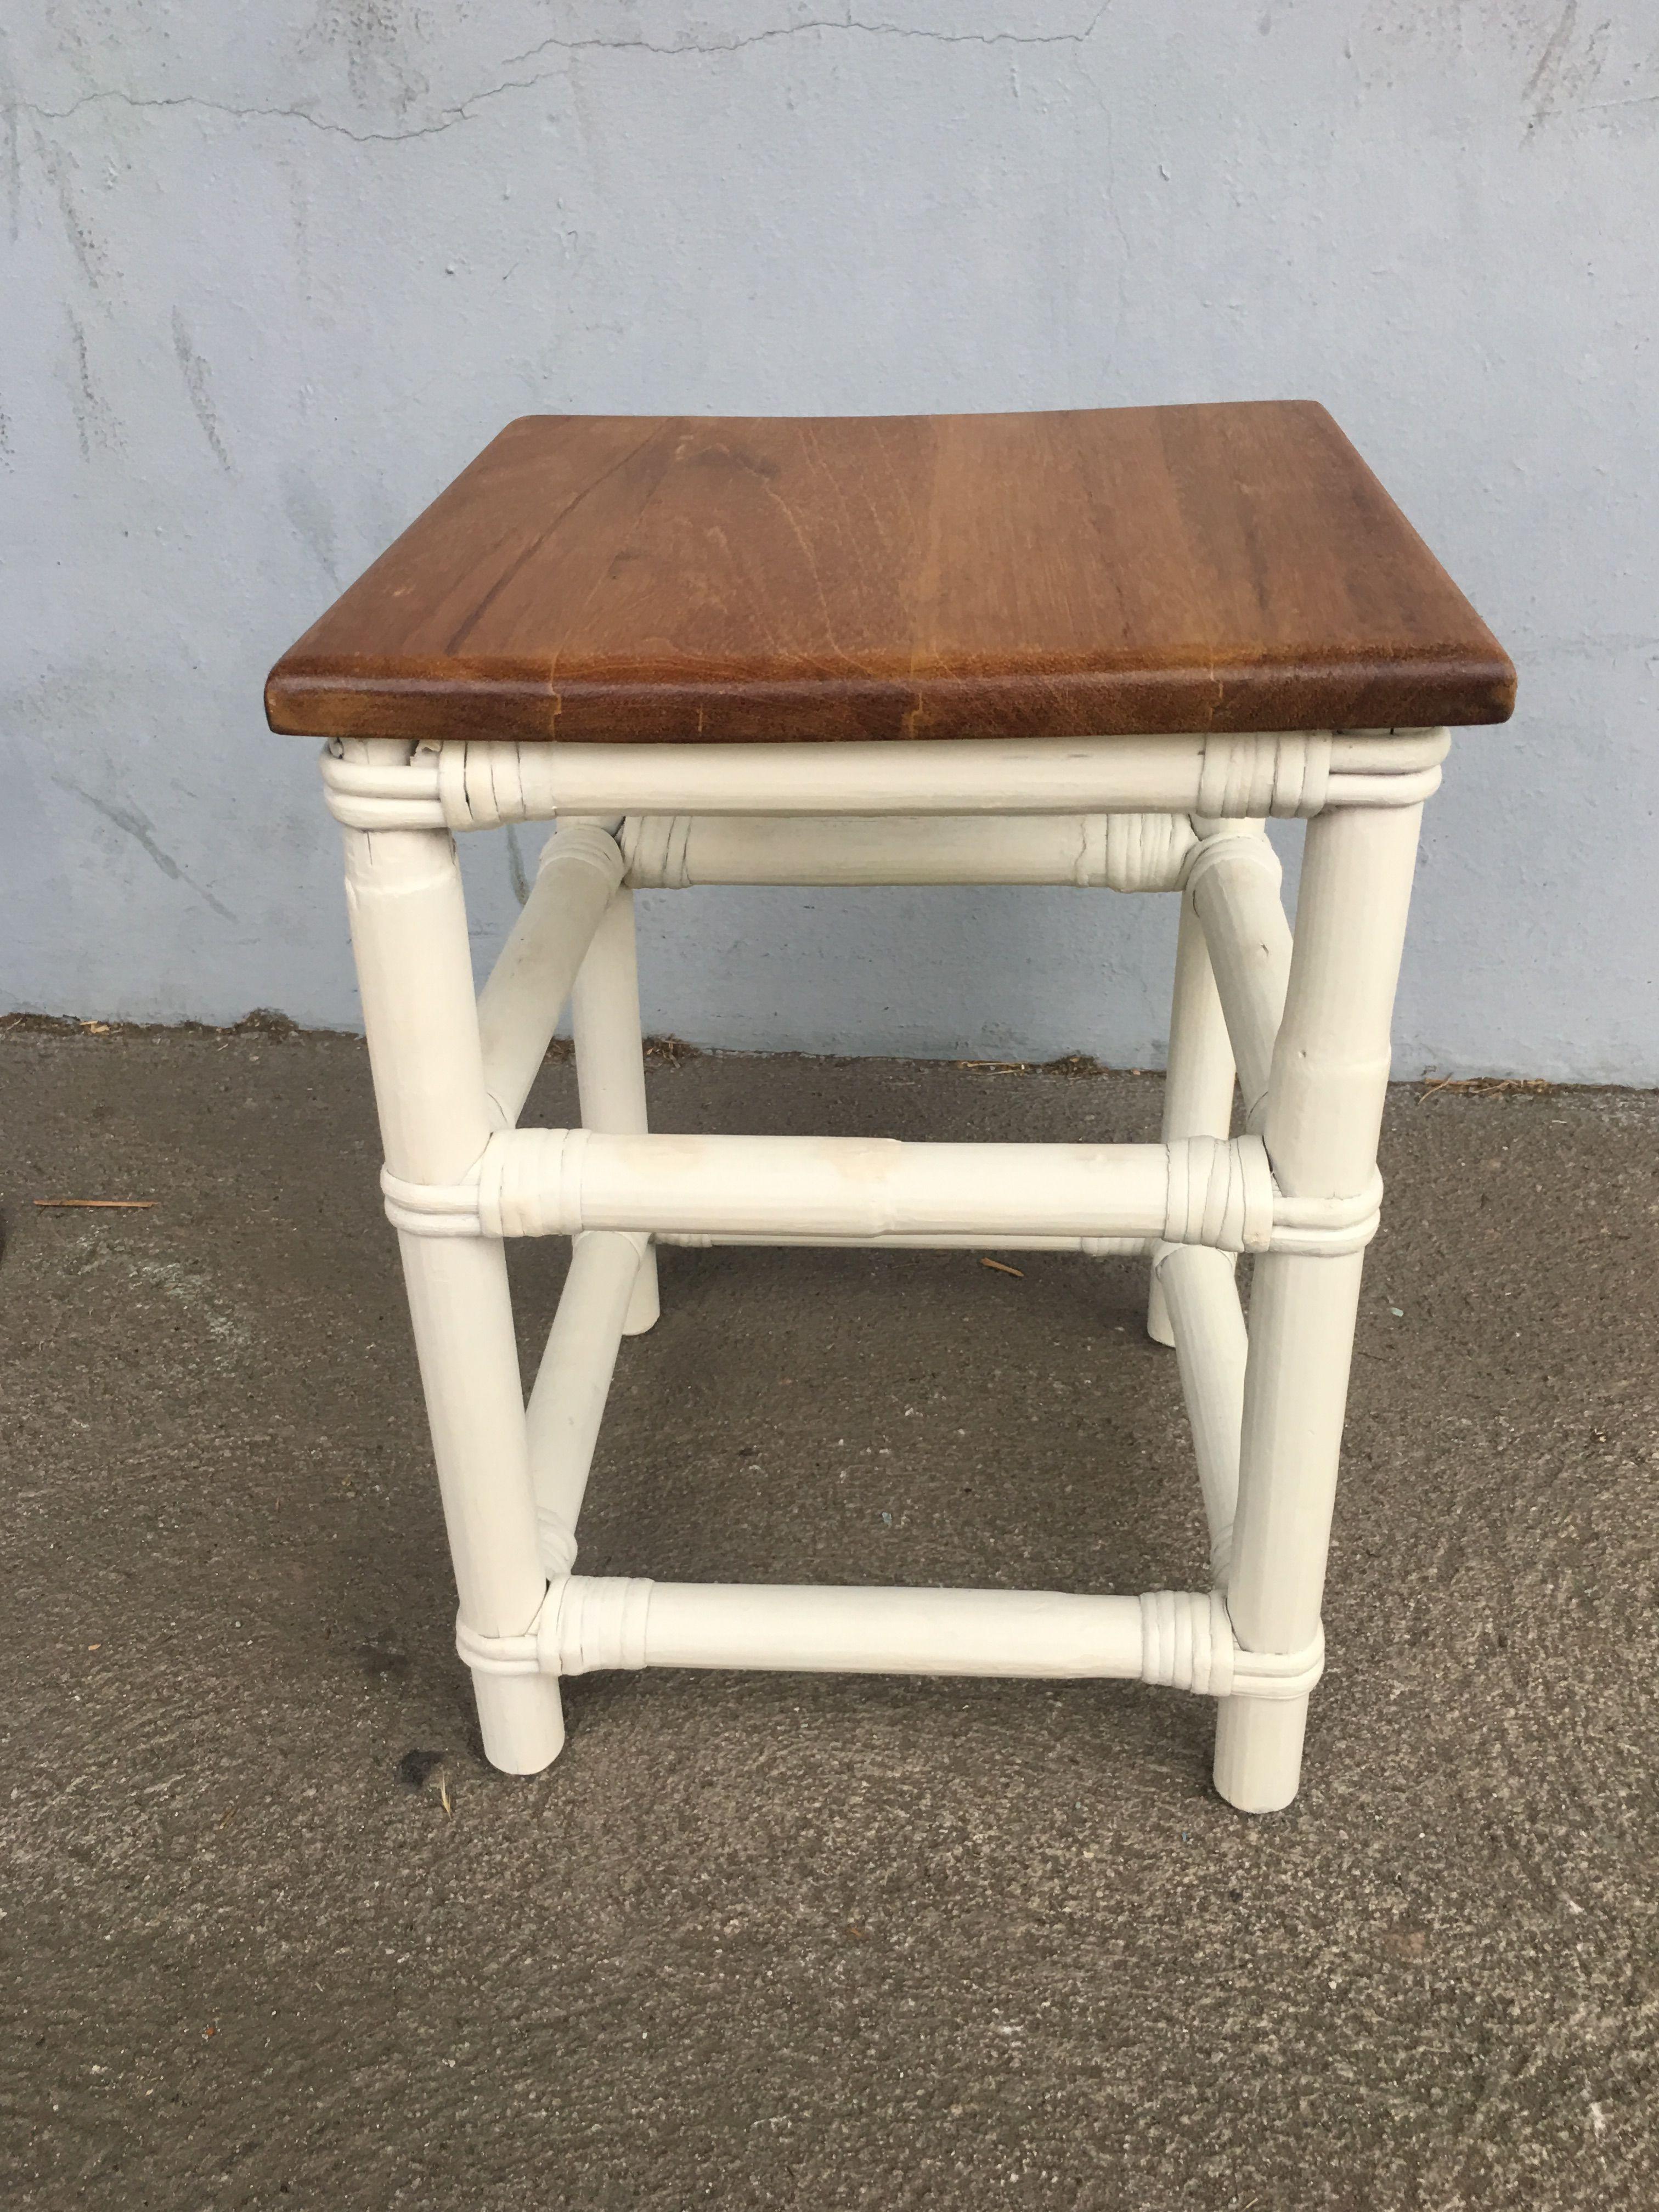 Original 1950s 1-strand rattan drink side table with mahogany top. The table features wicker wrapped accents with white painted rattan legs. All rattan, bamboo and wicker furniture has been painstakingly refurbished to the highest standards with the